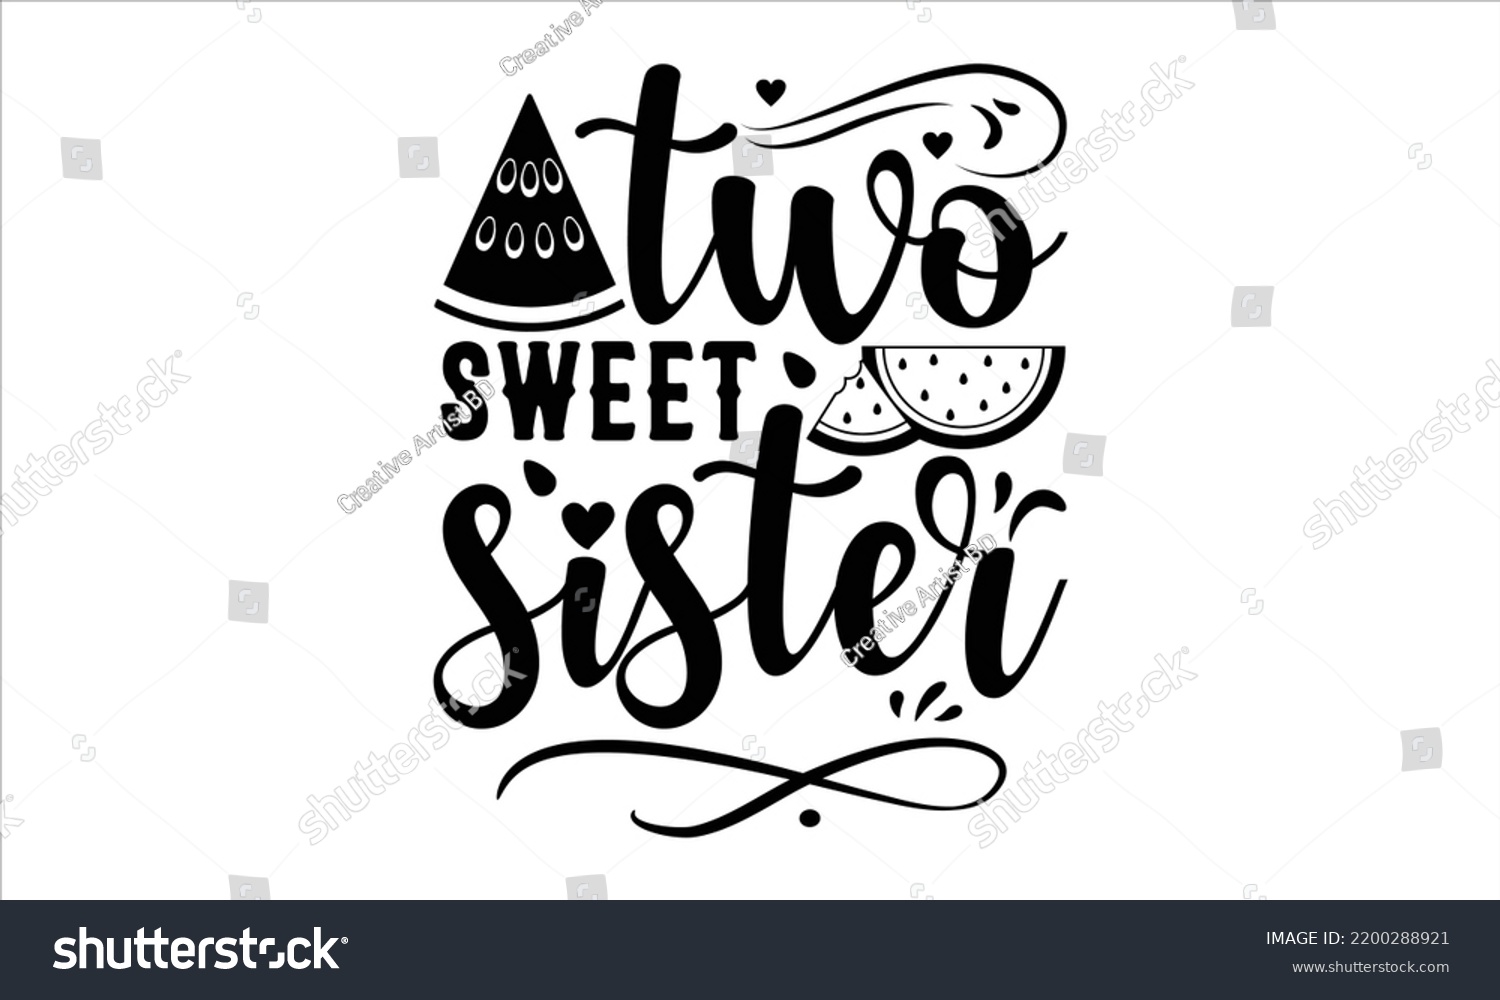 SVG of Two Sweet Sister - Watermelon T shirt Design, Modern calligraphy, Cut Files for Cricut Svg, Illustration for prints on bags, posters svg